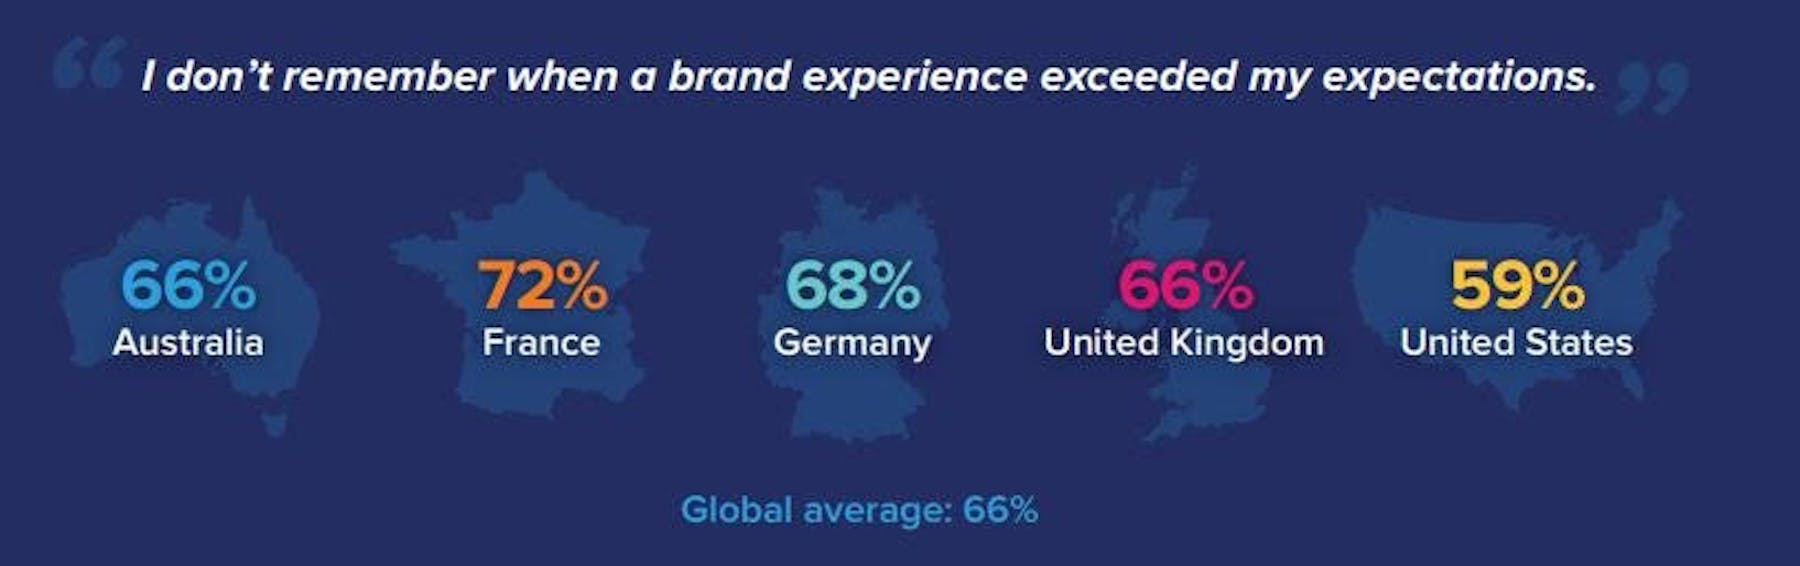 UX stats: customer experience